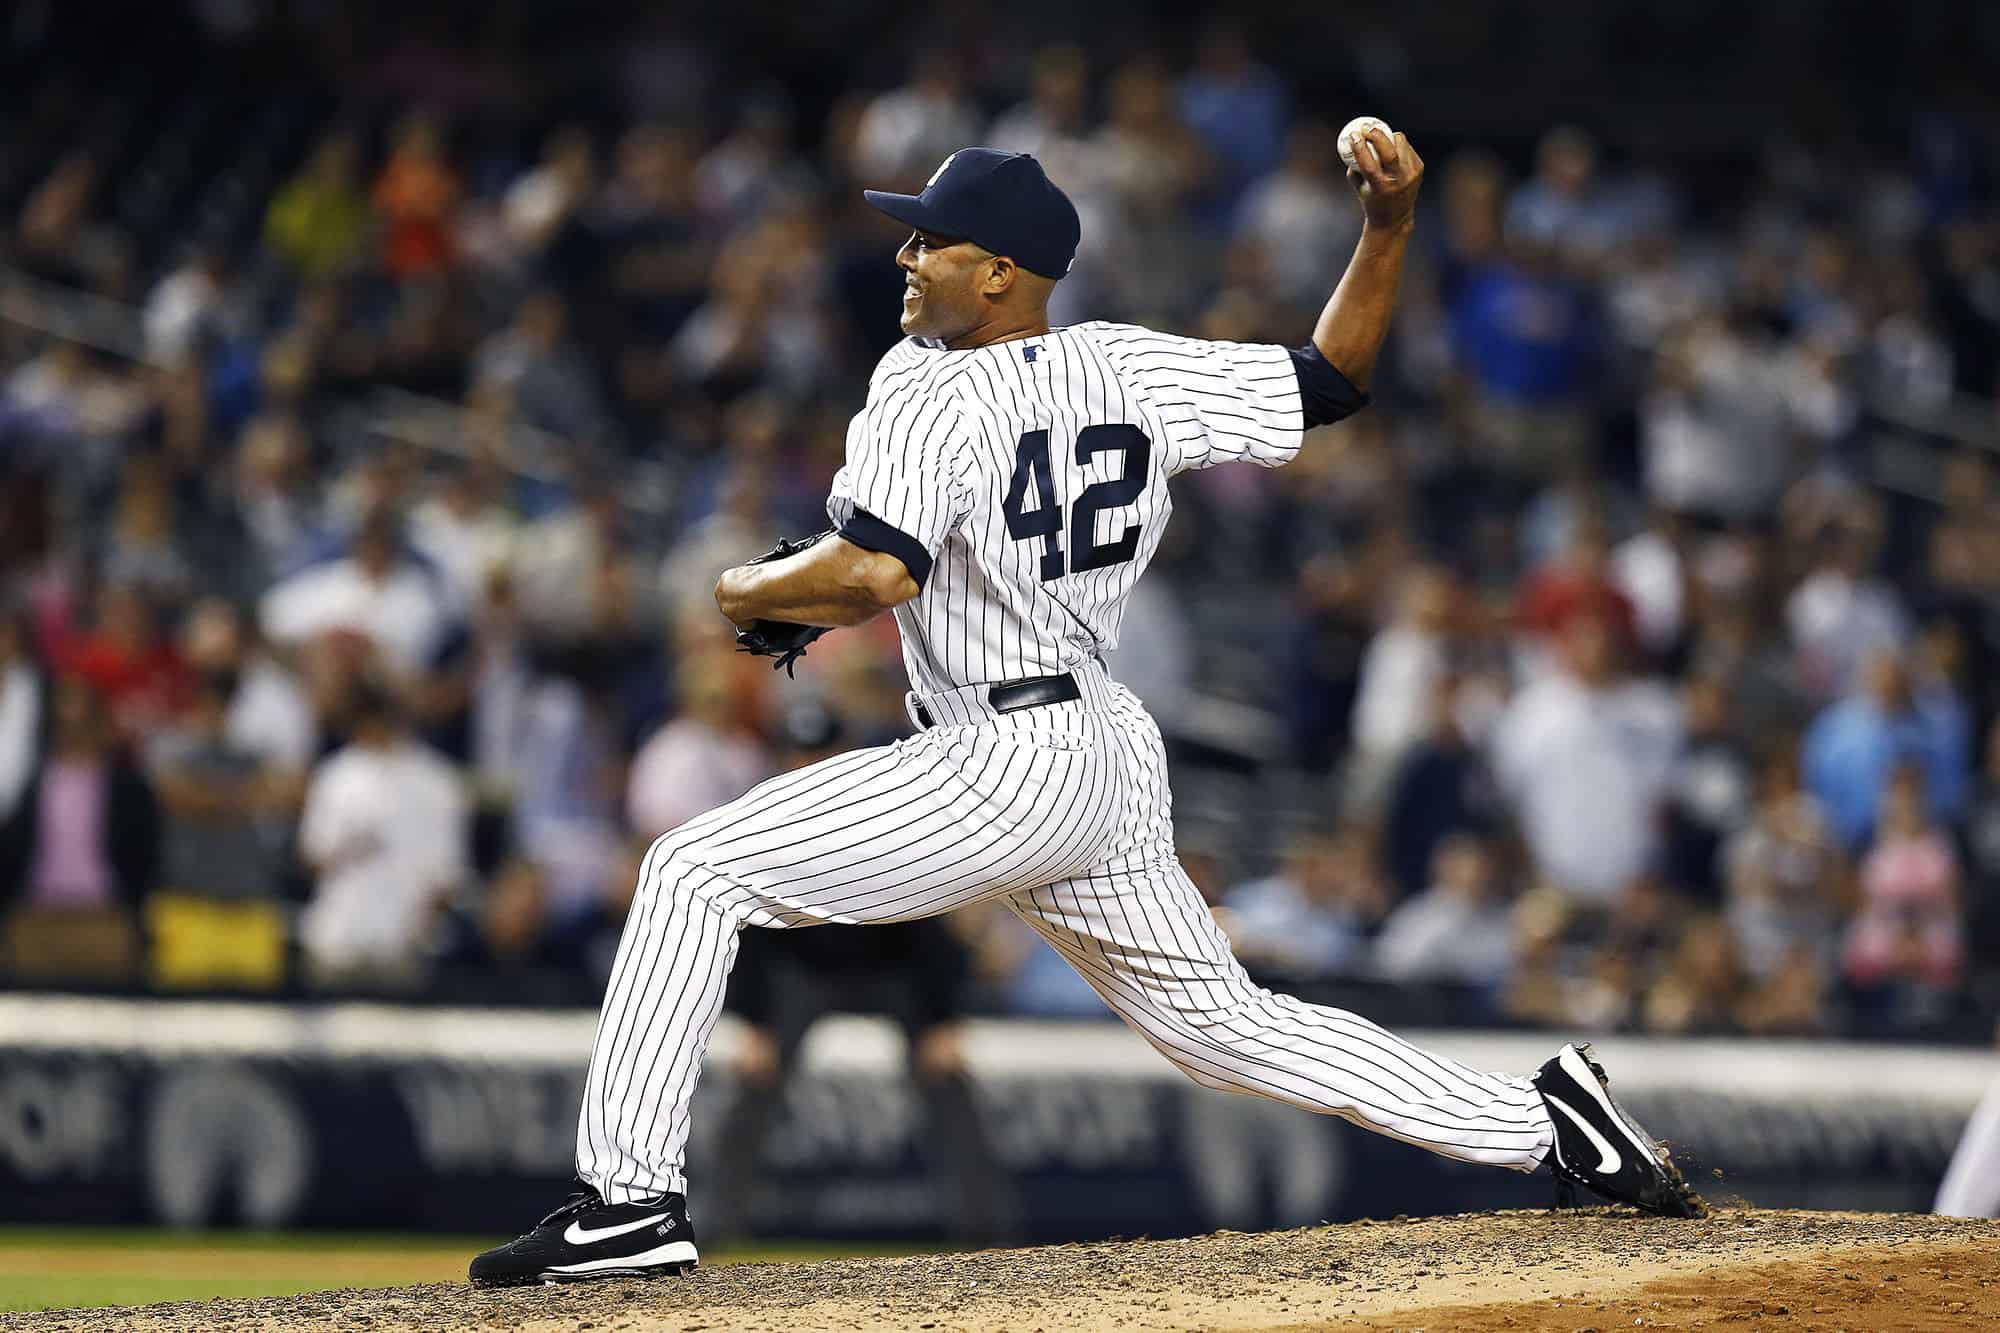 New York Yankees closing pitcher Mariano Rivera delivers a pitch during a June 21, 2013 home game against the Tampa Bay Rays at New Yankee Stadium.